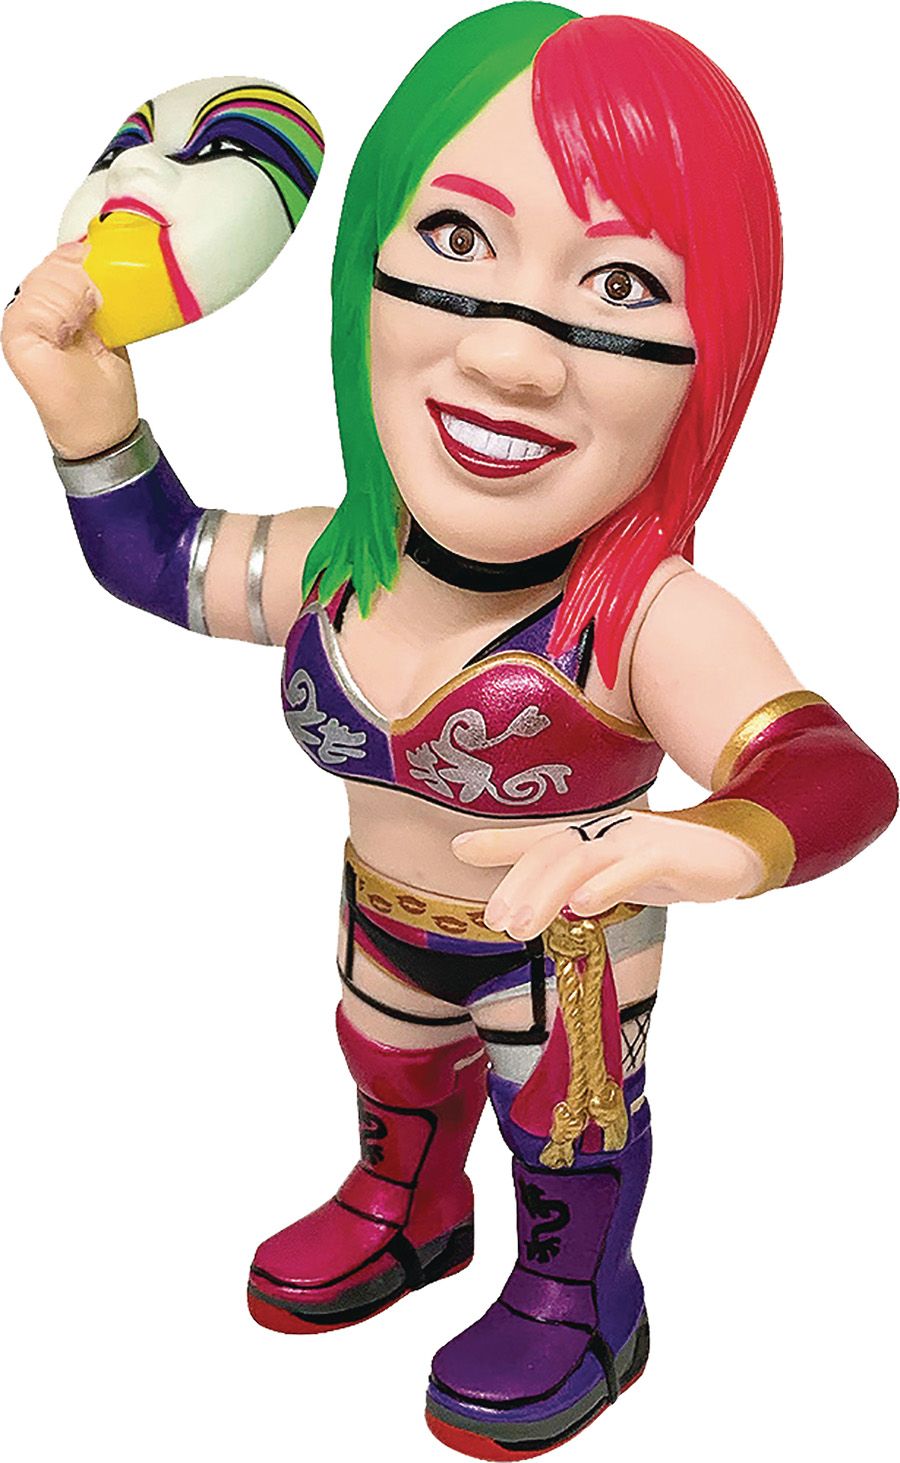 16 Directions Collection WWE 011 Asuka The Empress Mask Vinyl Figure